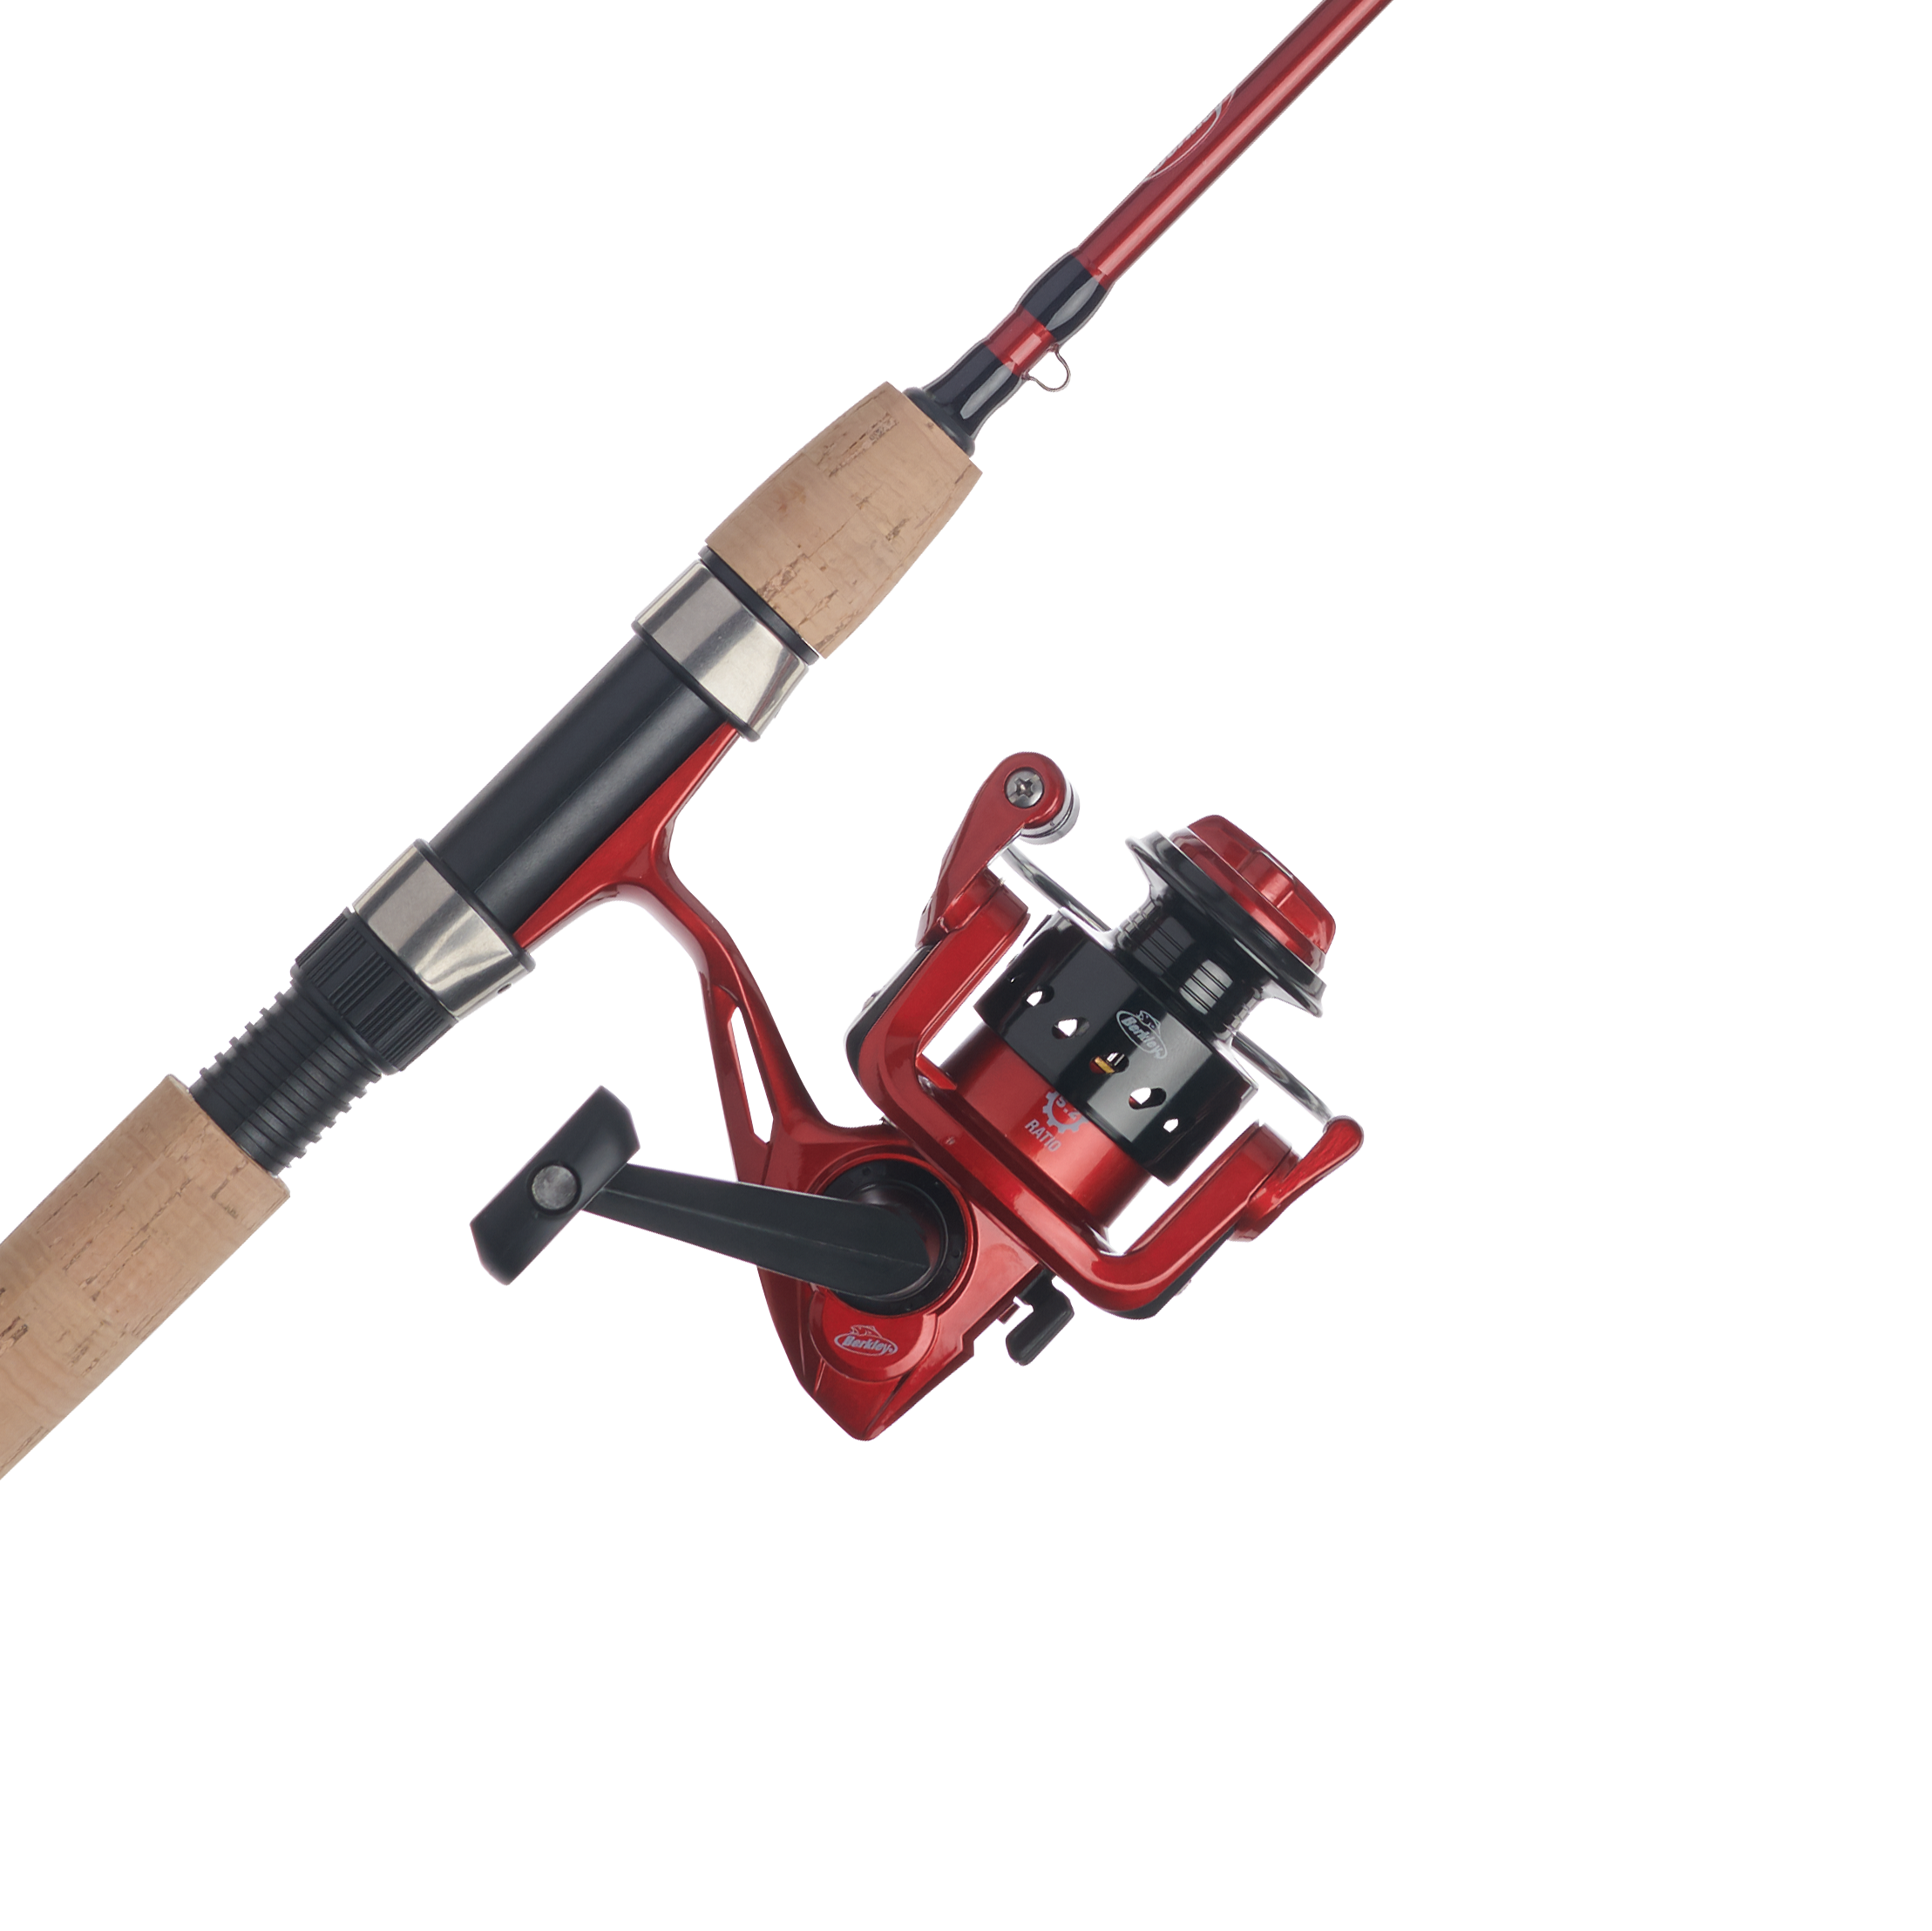 https://op2.0ps.us/original/opplanet-berkley-cherrywood-hd-spinning-combo-5-2-1-right-left-30-7ft-rod-length-medium-power-fast-action-2-pieces-rod-cwd2s-702mcbo-main